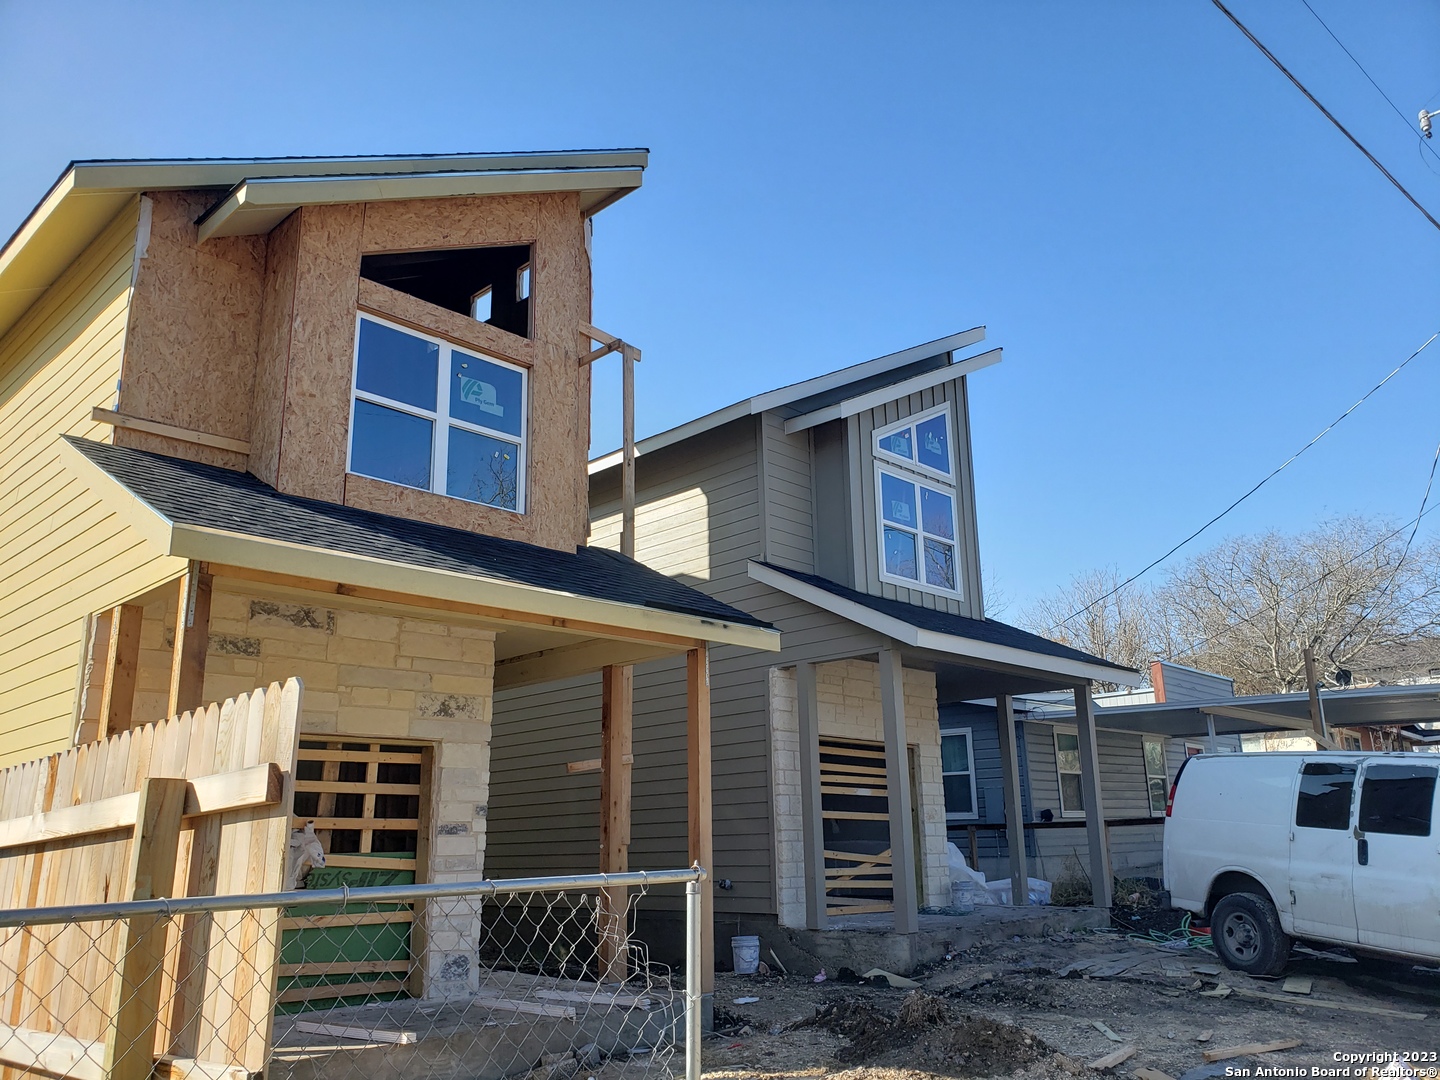 2 HOMES ON 1 LOT- NEW CONSTRUCTION - COST SEG. $240,000 Modern Architecture - 2 - 3 Bed 2.5 Bath w/ GARAGE. HUGE 1713 AC SF Per Home - TOTAL 3426 SF RENTALBLE SPACE. Great Floor Plan READY FOR YEARLY RENTAL INCRESES, Great for Owner Live in 1 house and Rent the Second House. ALL Wood Cabinets, Granite Counter Tops, SS Appliances, Moen Faucets, TILE FLOORS THROUGHOUT FIRST & SECOND FLOOR- LOW MAINTINANCE, Tall 10 Foot First Floor. Upgraded Light Fixture Package - 18 X 15 LIV ROOM W/ Fixed Glass Windows and Full Light Back Door open to Huge 15 x 8 Covered Back Patio, 8 Foot Front and Back Doors, Huge 15 x 14 Master Suite w, 14 Foot Vaulted Ceilings, Oversized All Wood Vanity w/ Granite Top & Undermount Sink - Walk in Tile Shower. Large Secondary Rooms, Stick Built Construction w/ OSB Walls & Cement Fiber Siding, Rock Front, Great Floor Plan - Location Going up in Value Quickly- Downtown SA Rents Rising Home is uniquely situated just MINUTES from popular venues, The Pearl, Farmers Market, Riverwalk, Mall, Alamo Brewery, AT&T Center, Alamo Dome, the Tower of the Americas, The Mexican Embassy, plus. Bedrooms are generously sized and the breathtaking master bedroom is fit for a King!